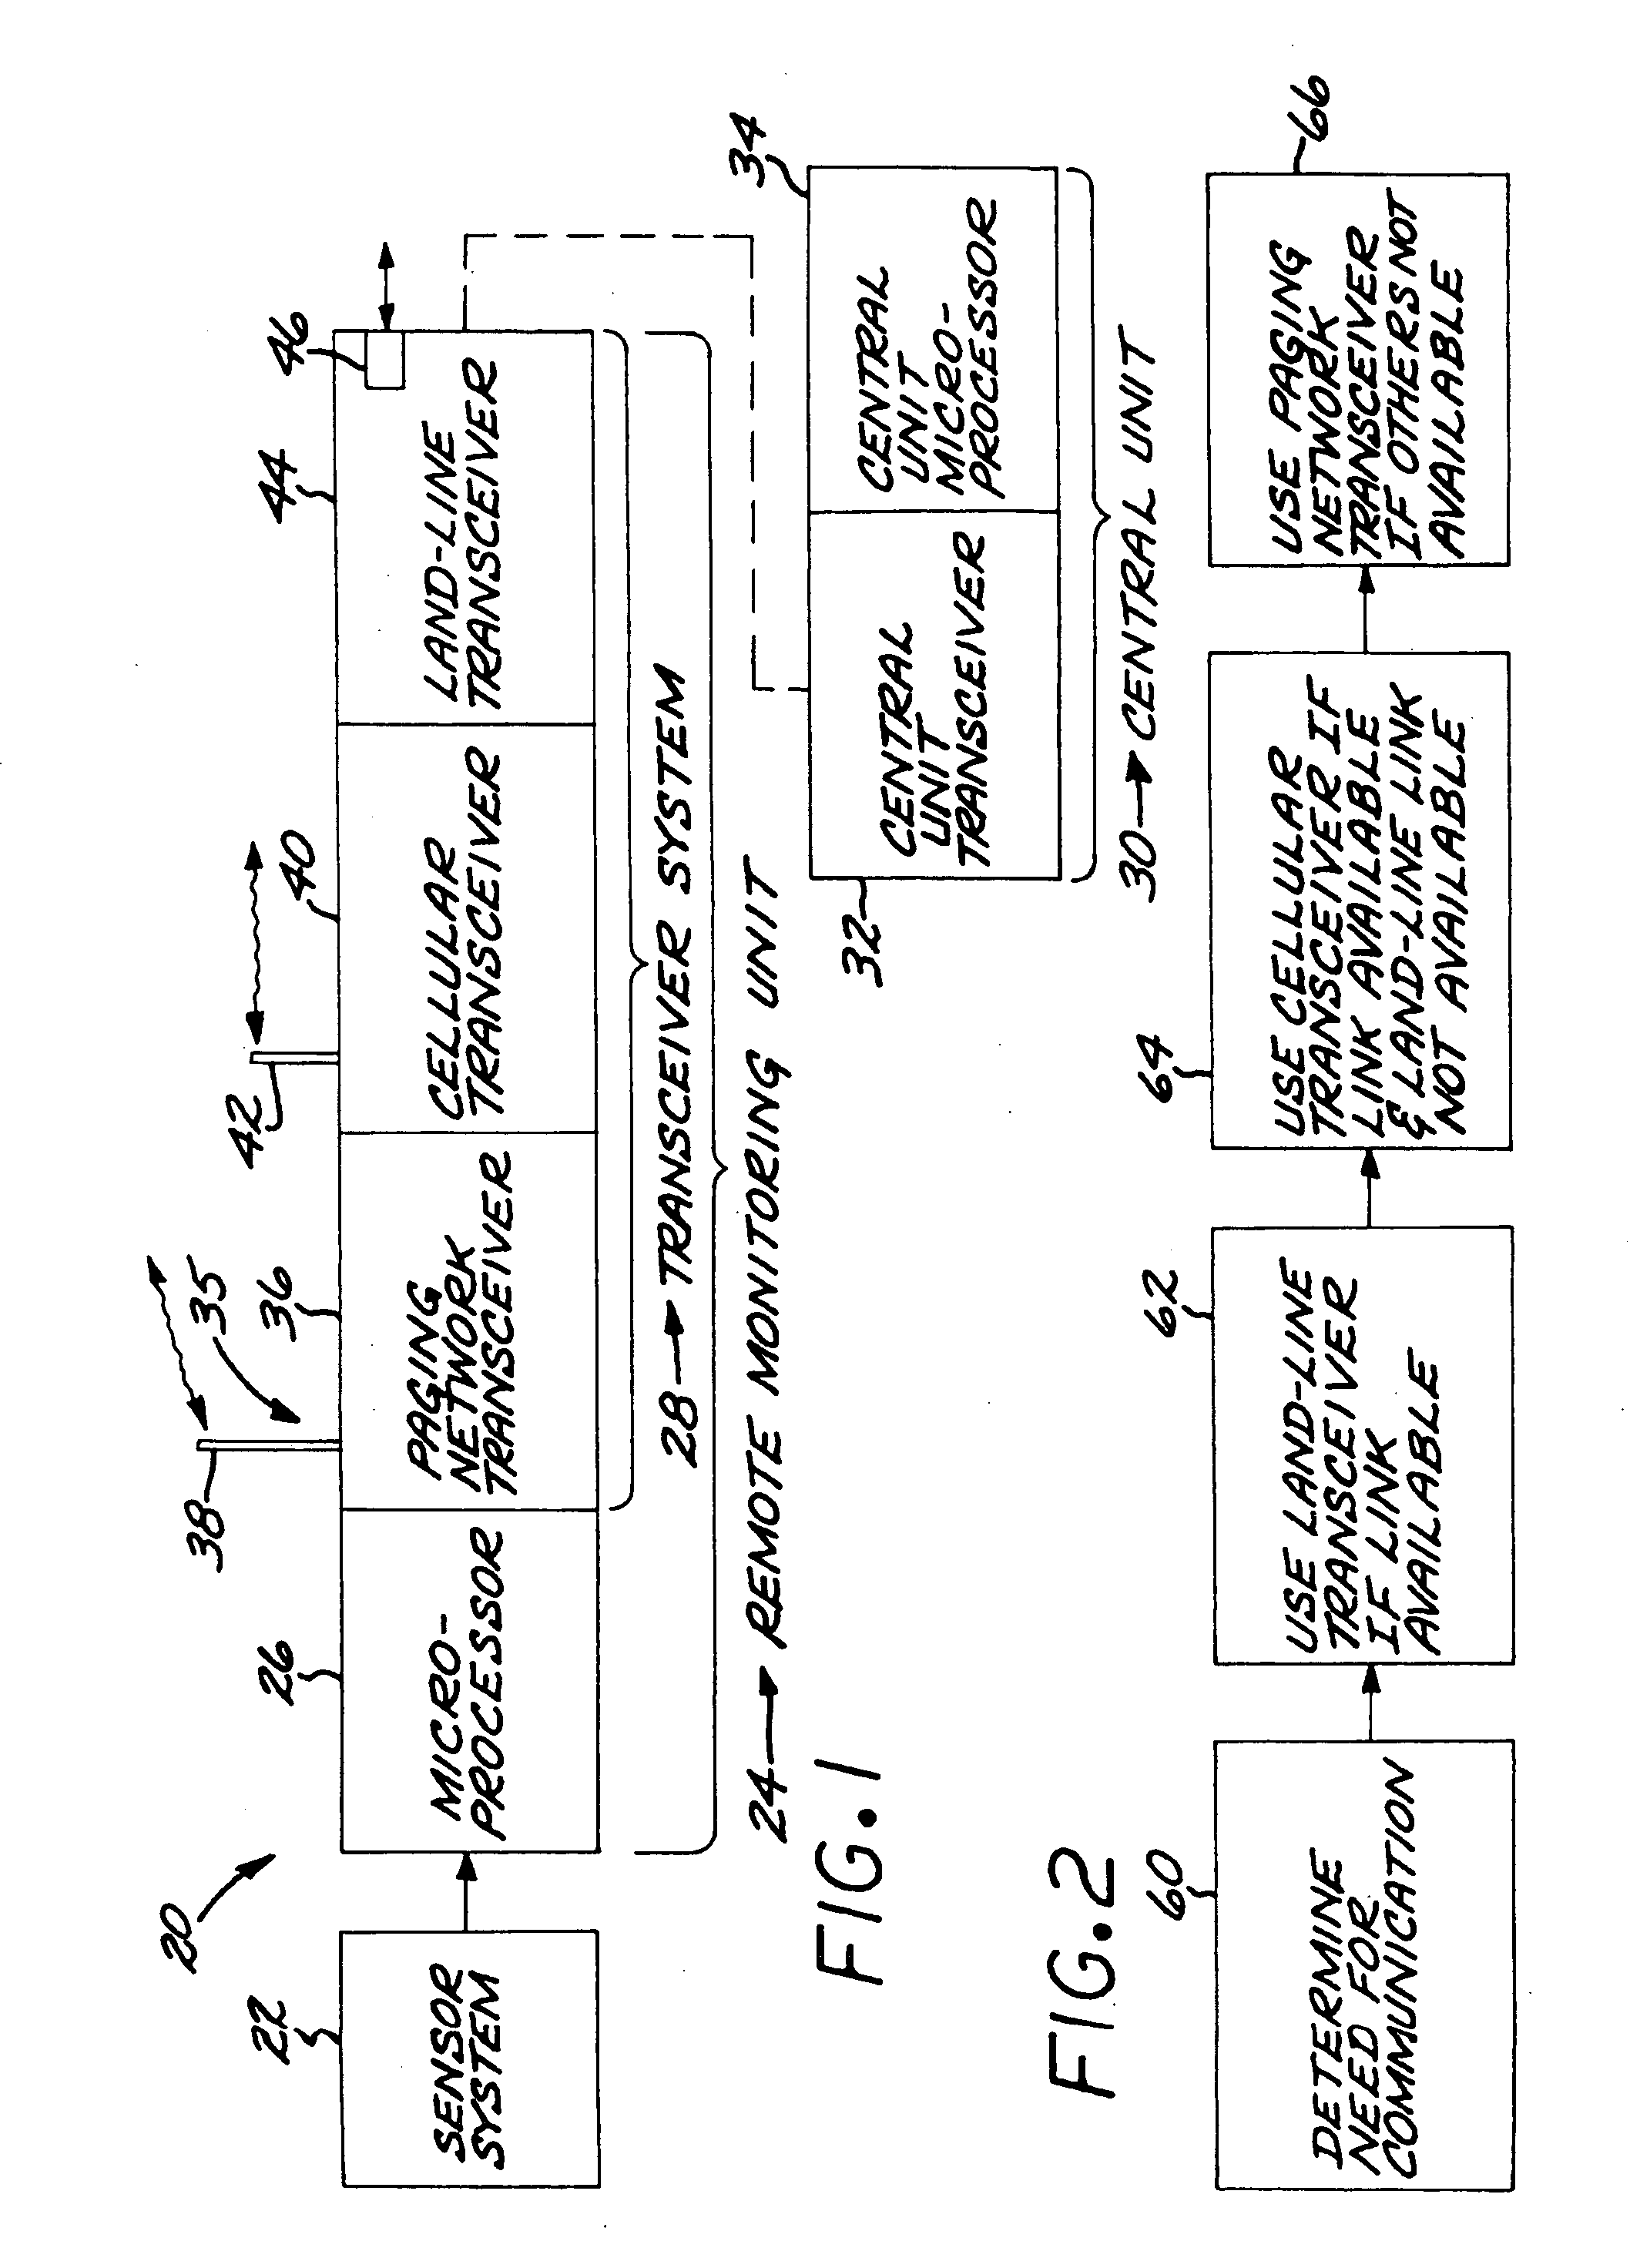 Medical monitoring system having multiple communications channels